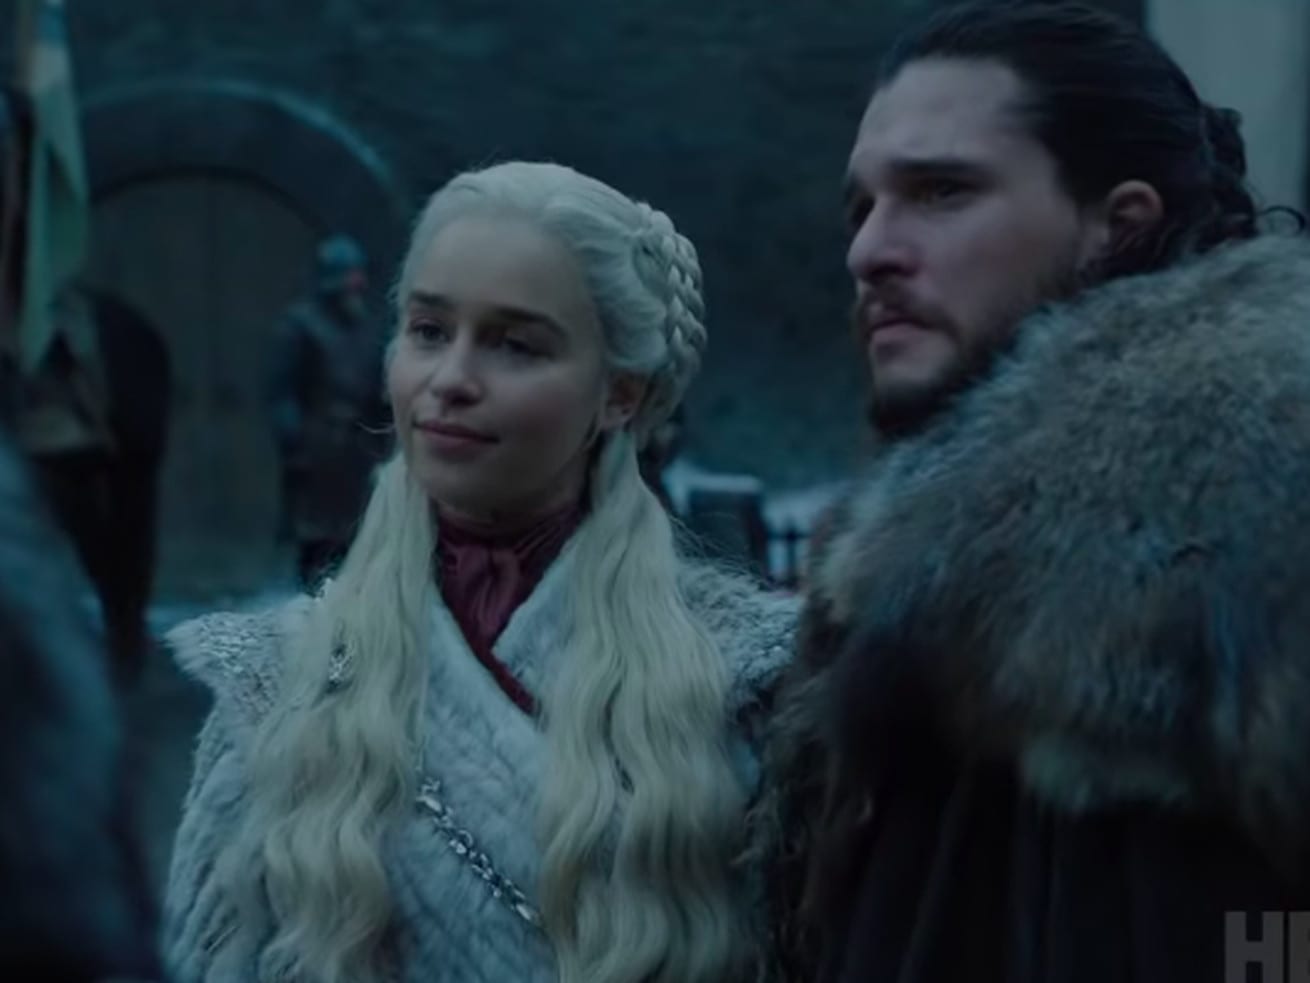 Game of Thrones’ 8th and final season premieres April 14. Watch the latest teaser now.